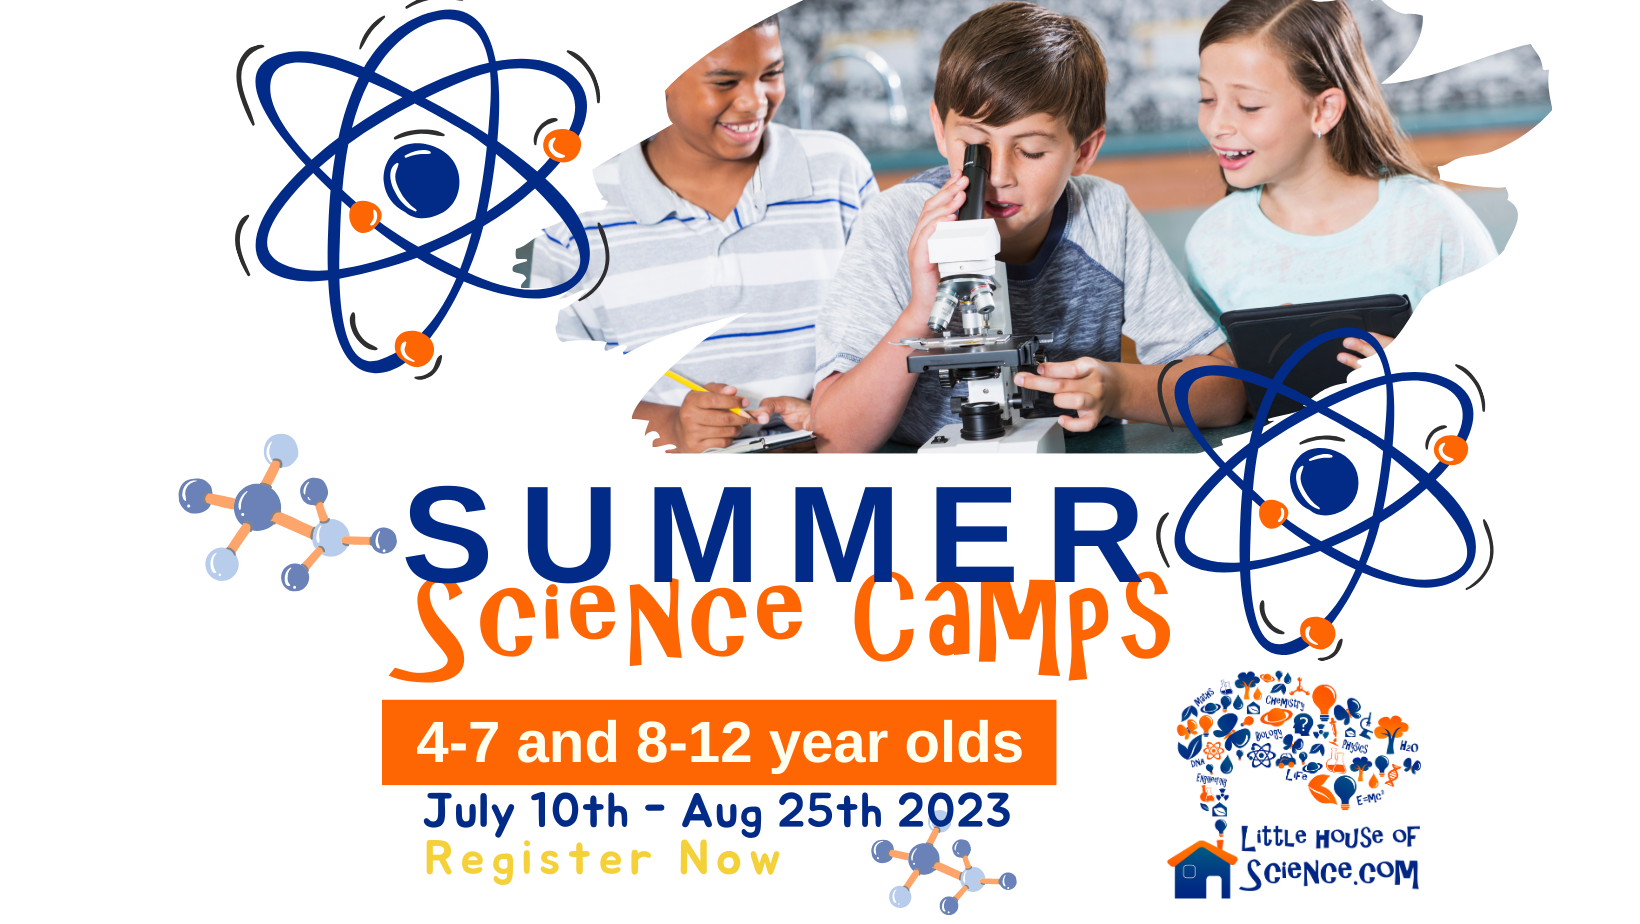 Summer Science Camps London 2023